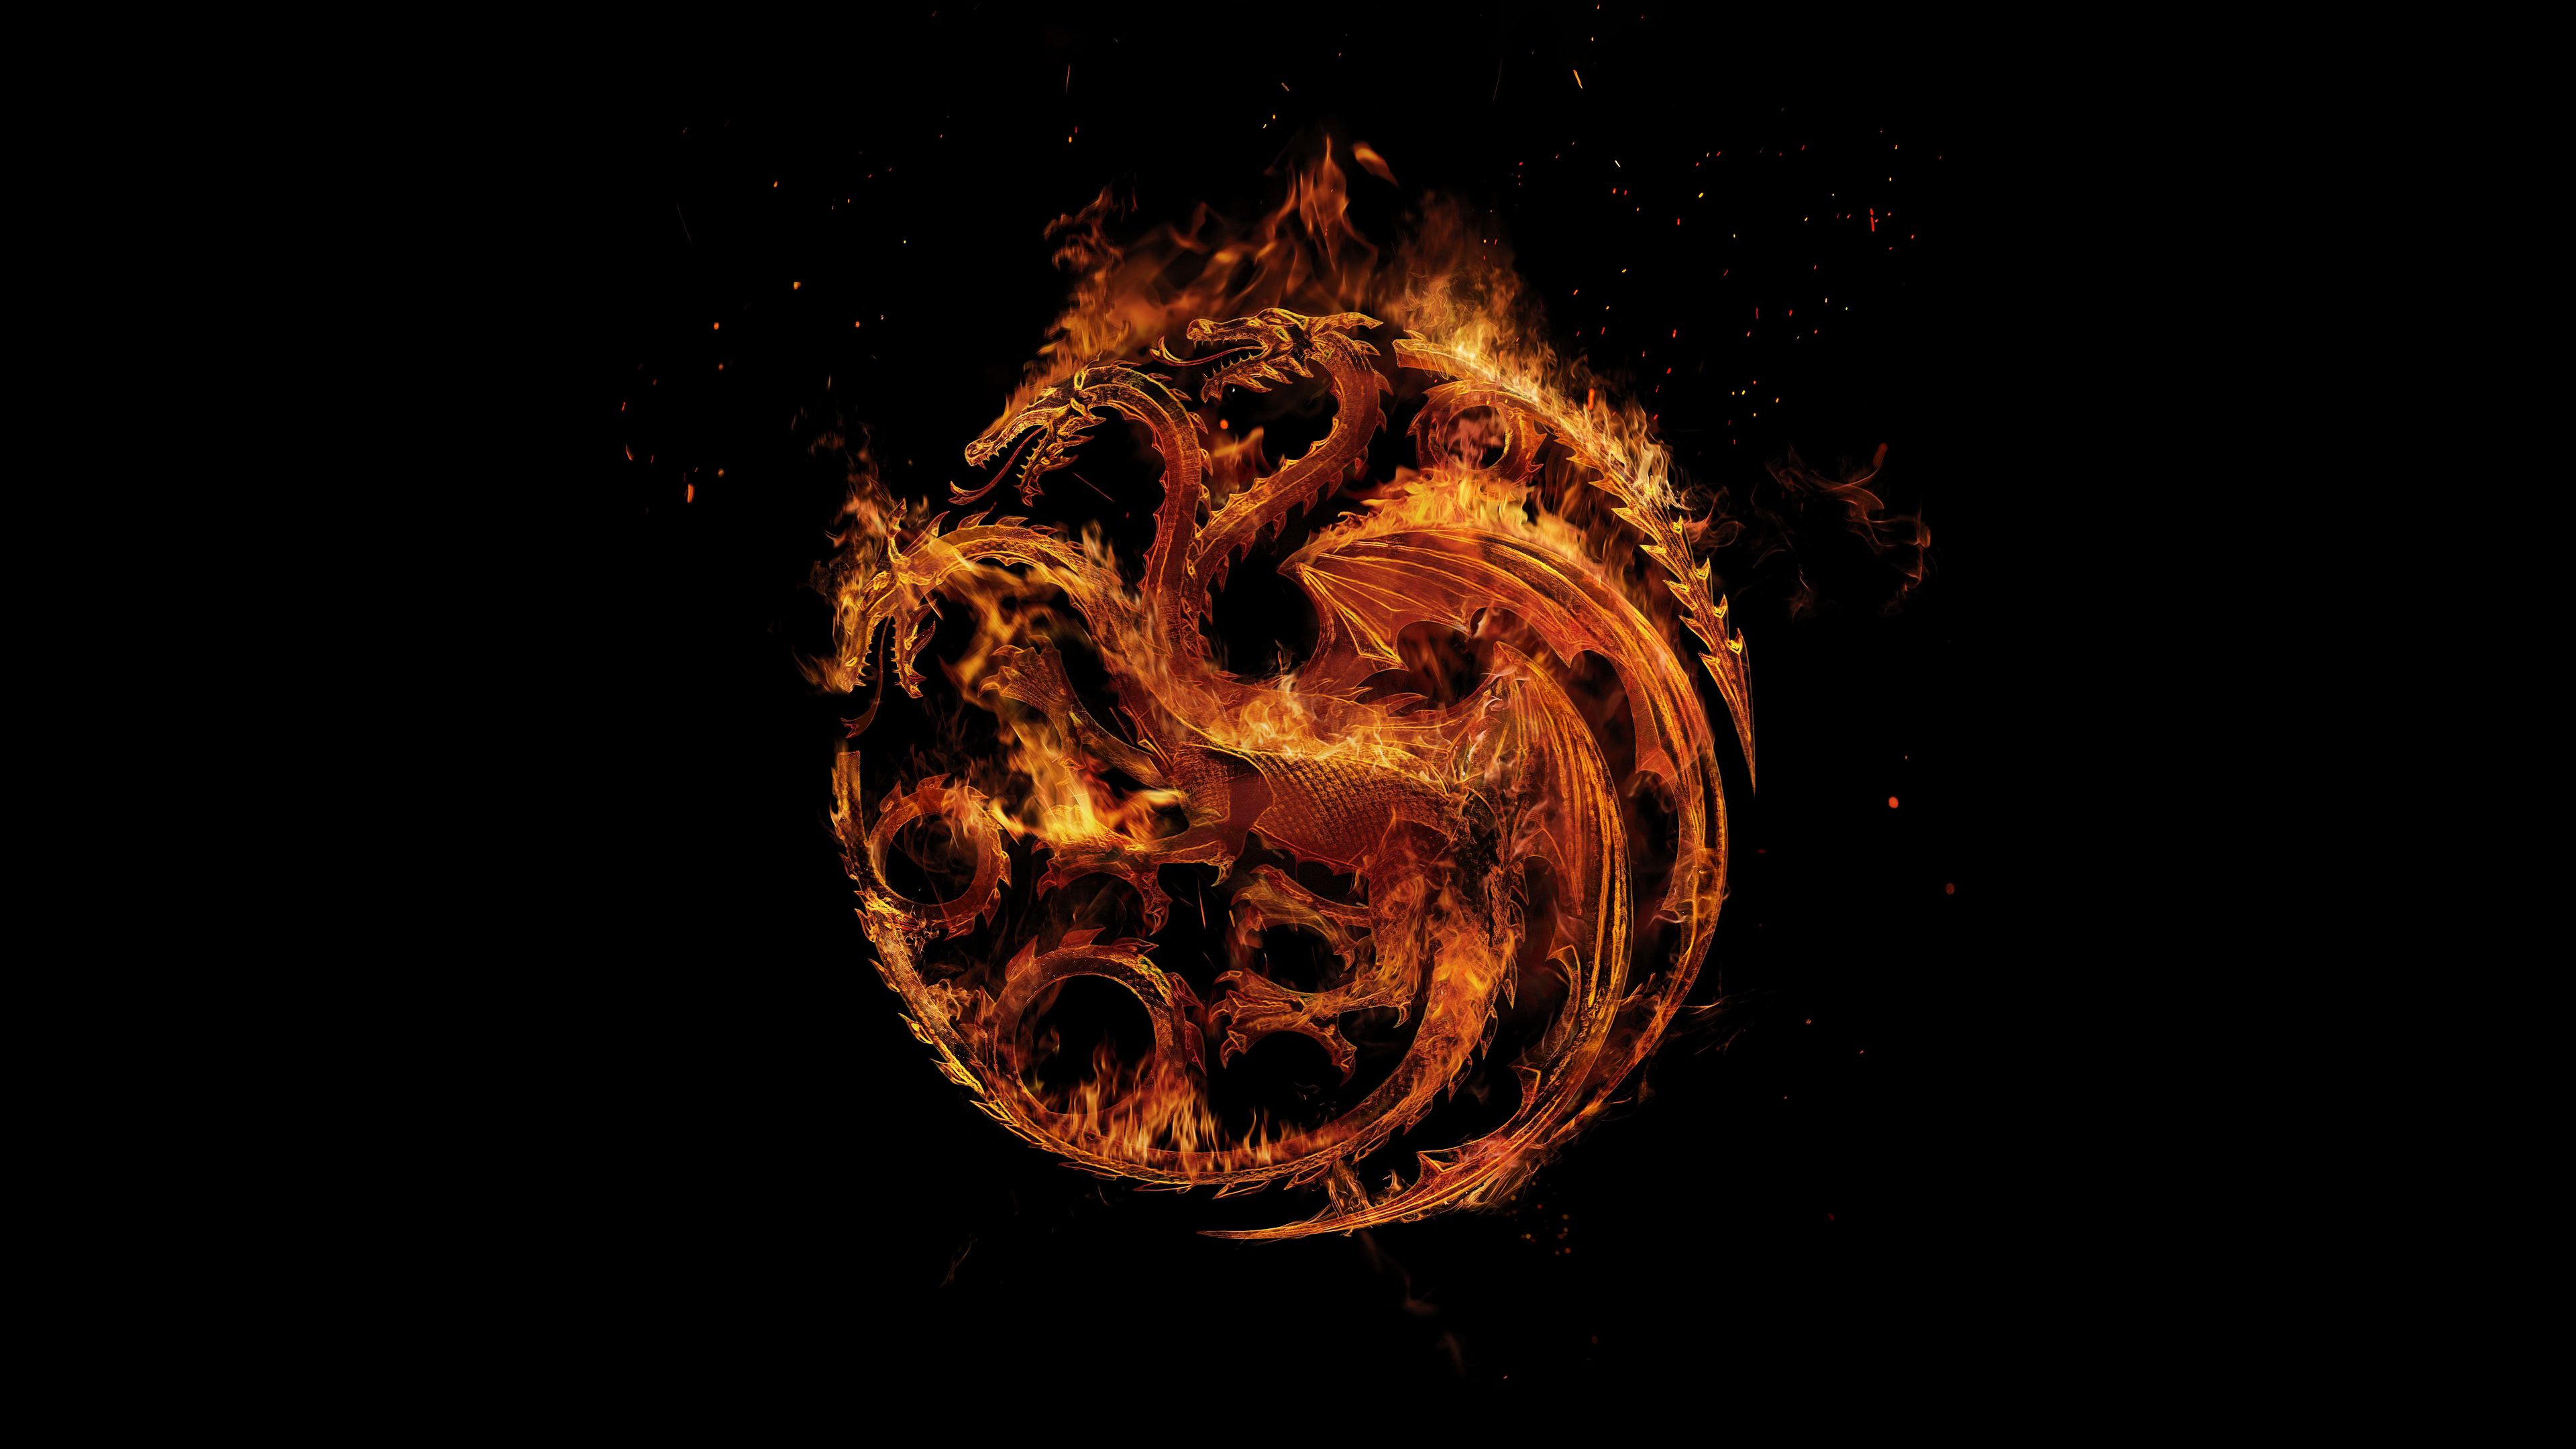 A flaming Targaryen sigil, composed of a dragon, a lion, and a wyvern, on a black background. - Blood, dragon